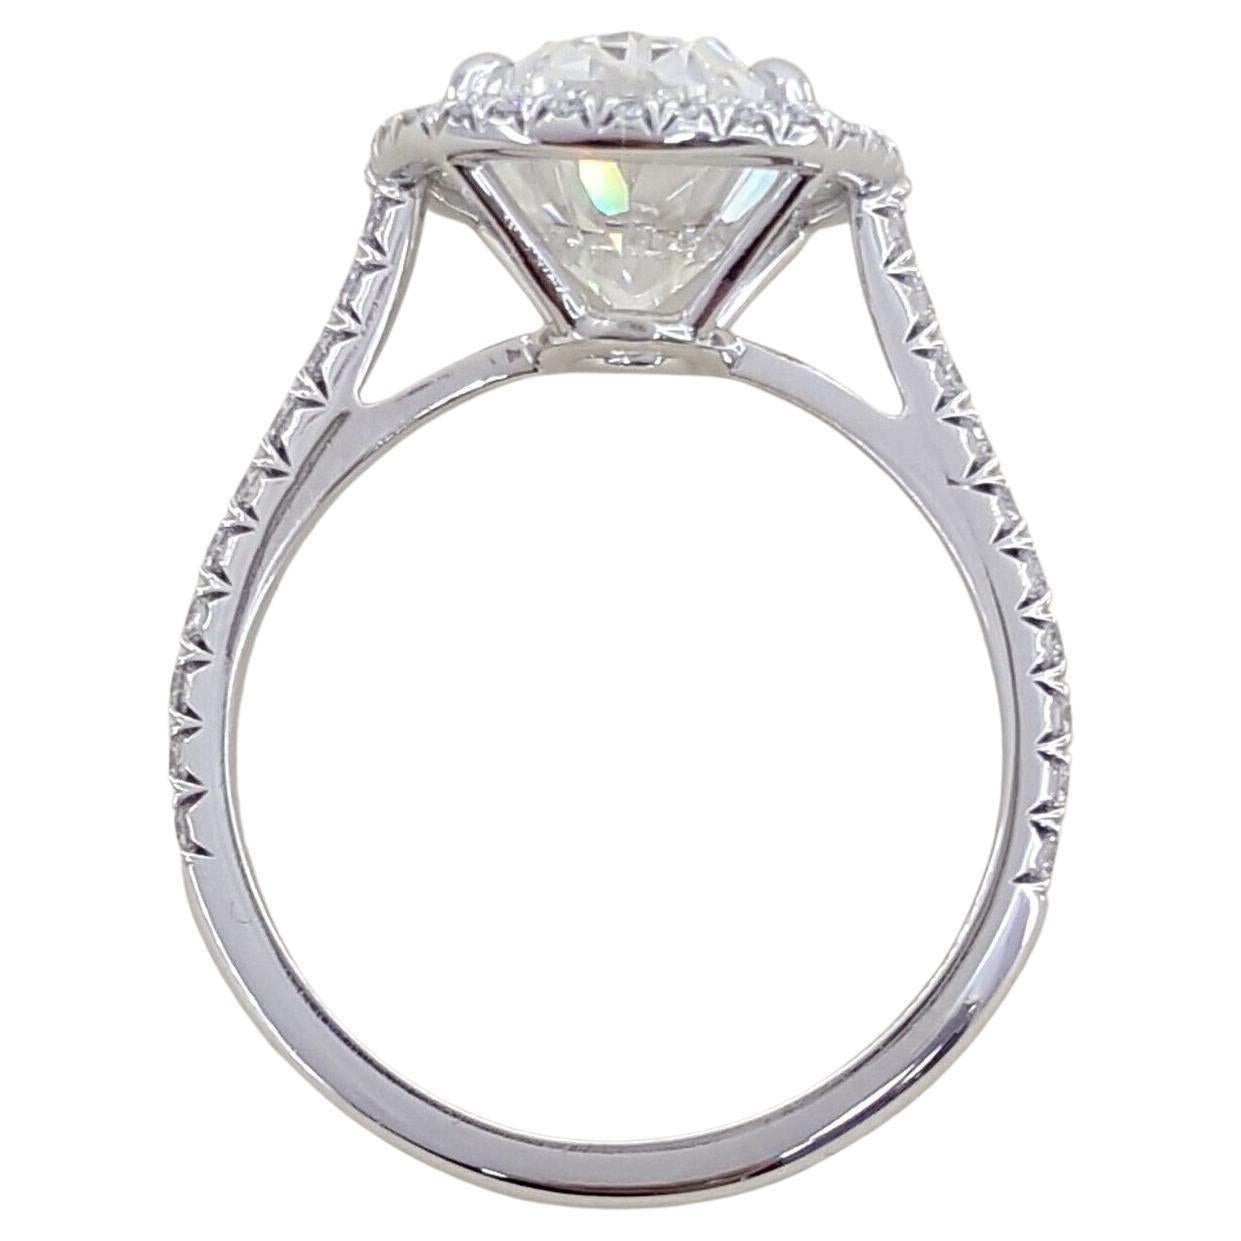 Authentic Tiffany & Co. Platinum Soleste Princess Diamond Halo Ring In Excellent Condition For Sale In Rome, IT